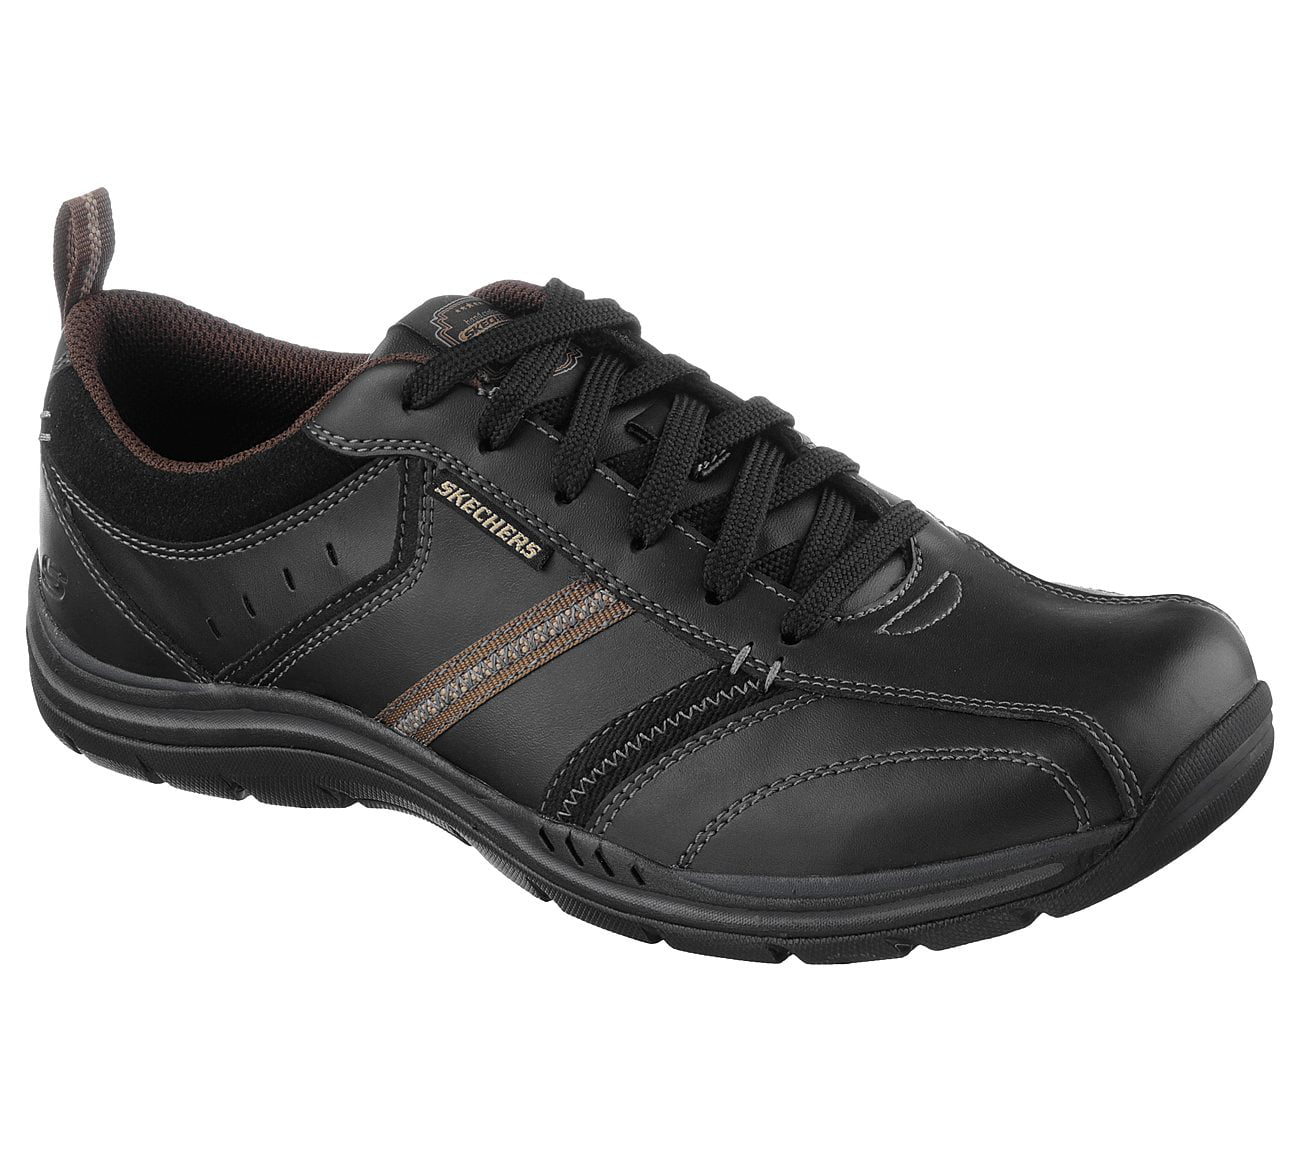 skechers usa men's expected devention oxford